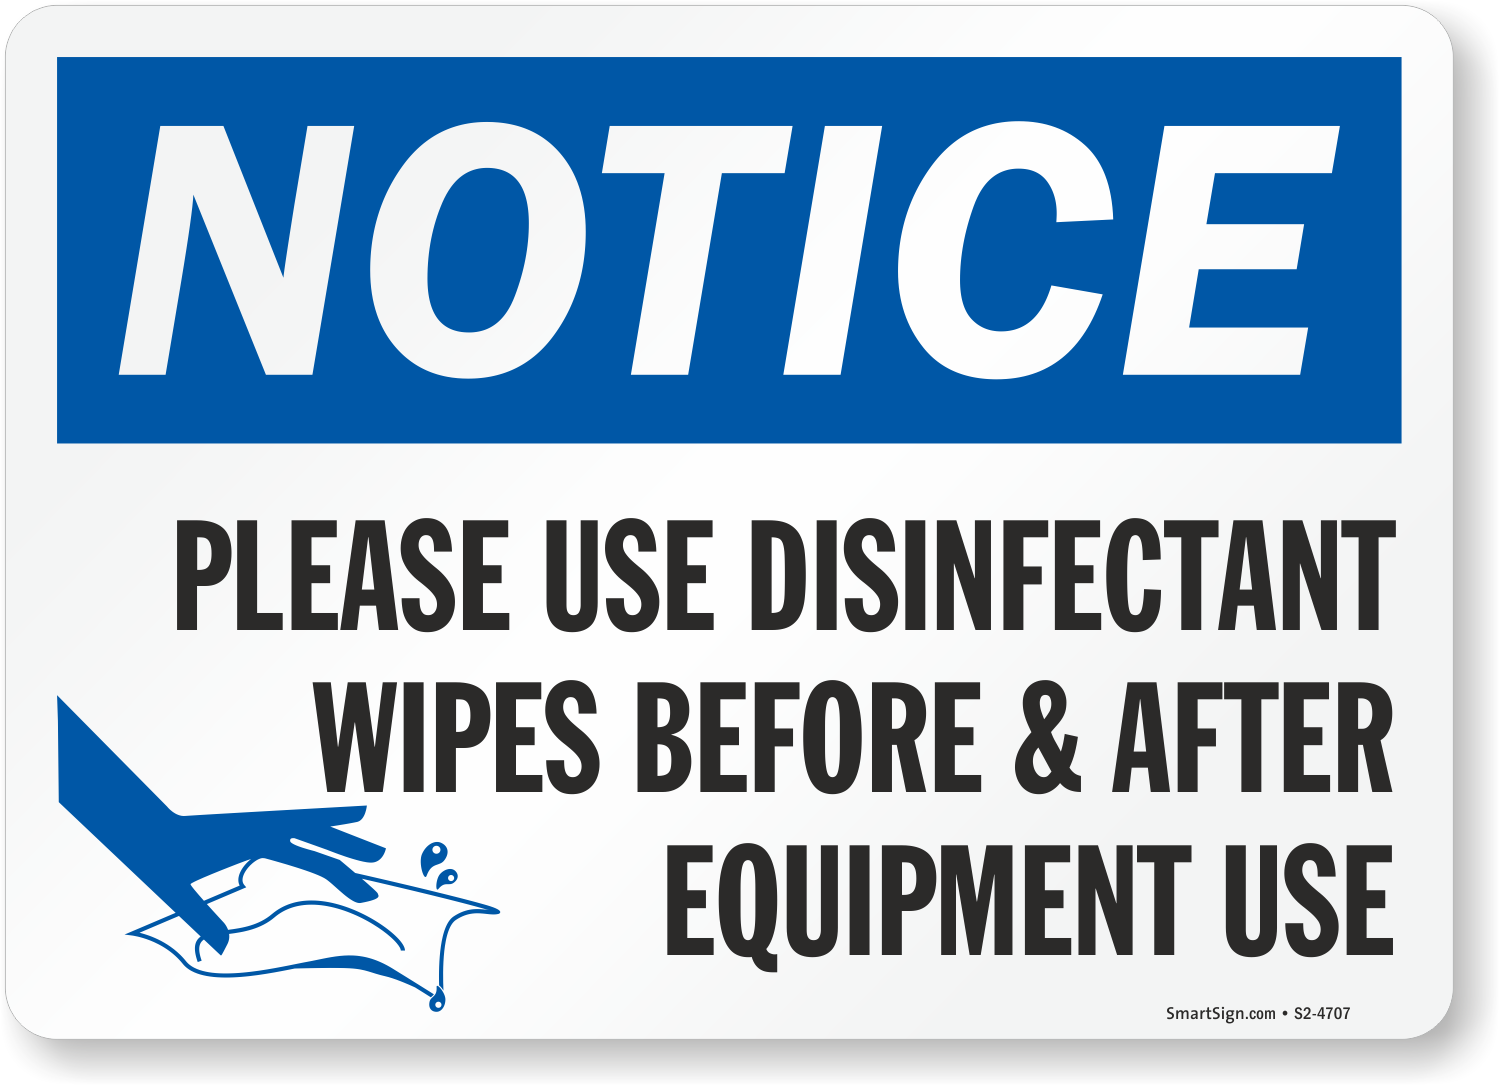 How Effective are Disinfectant Wipes in Healthcare Facilities?